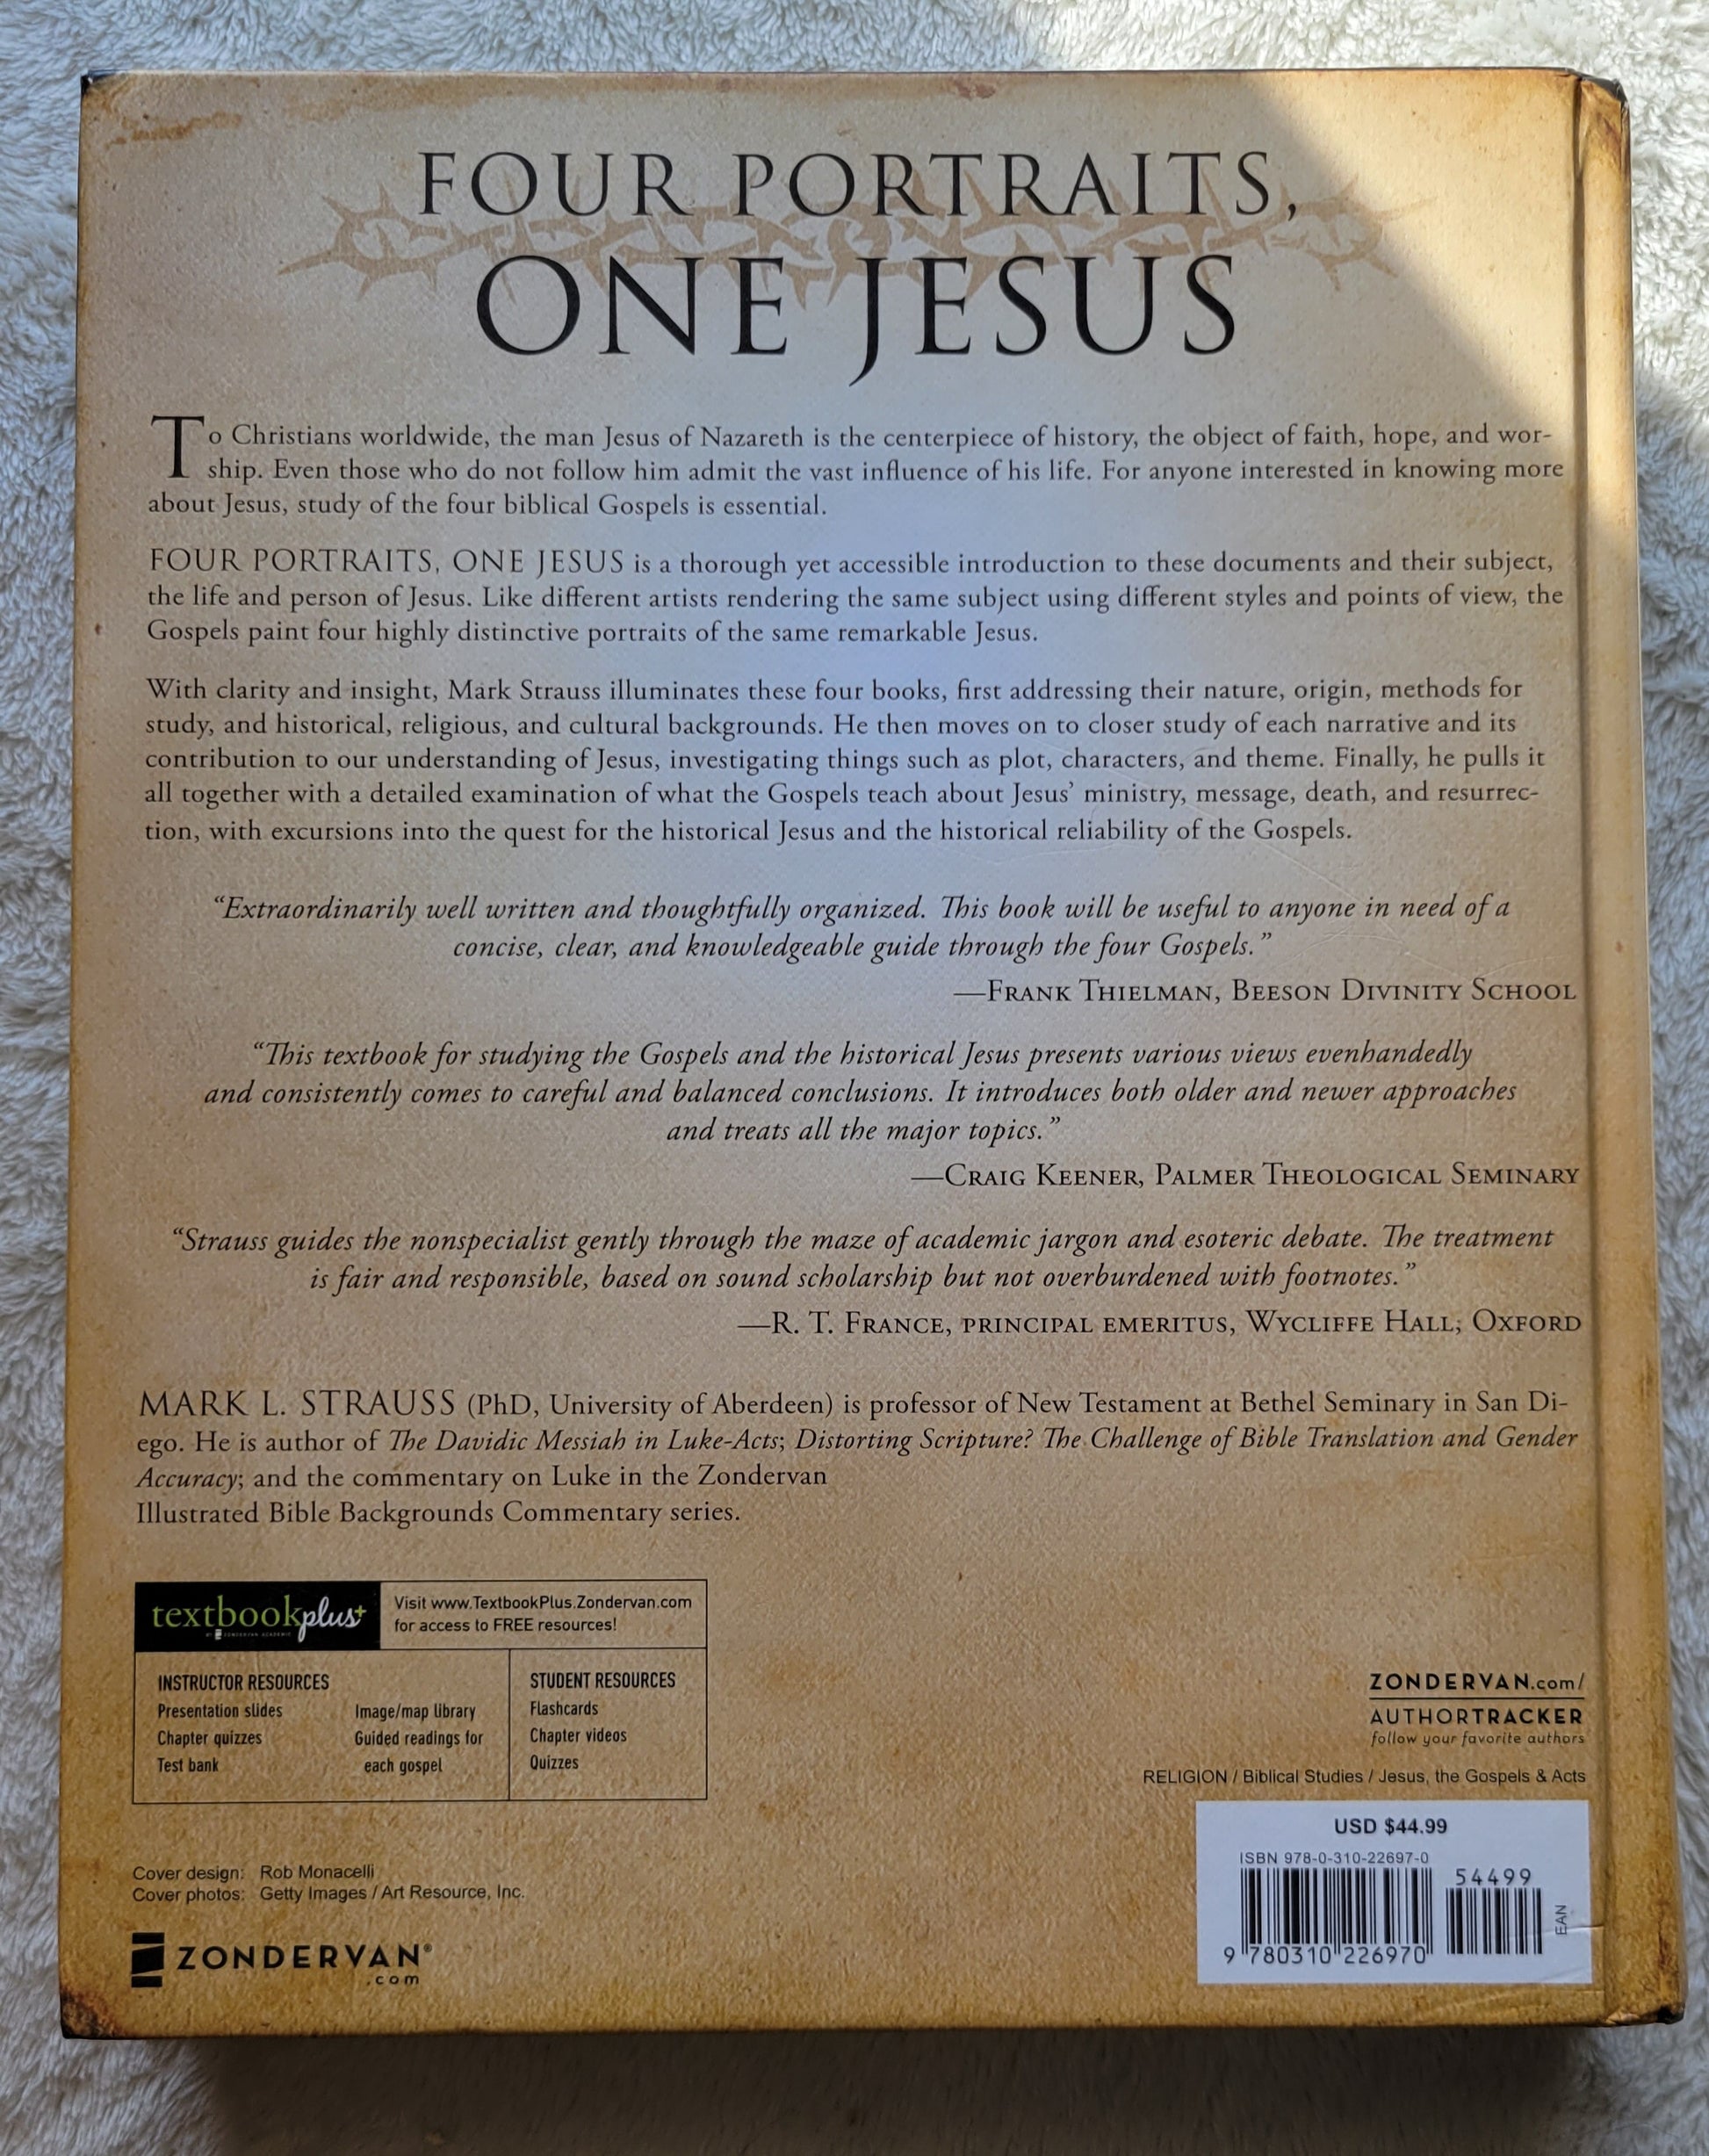 Used book for sale, "Four Portraits One Jesus: A Survey of Jesus and the Gospels", written by Mark L. Strauss in 2007, published by Zondervan.  Investigating the historical Jesus and reliability of the Gospels.  View of back cover.